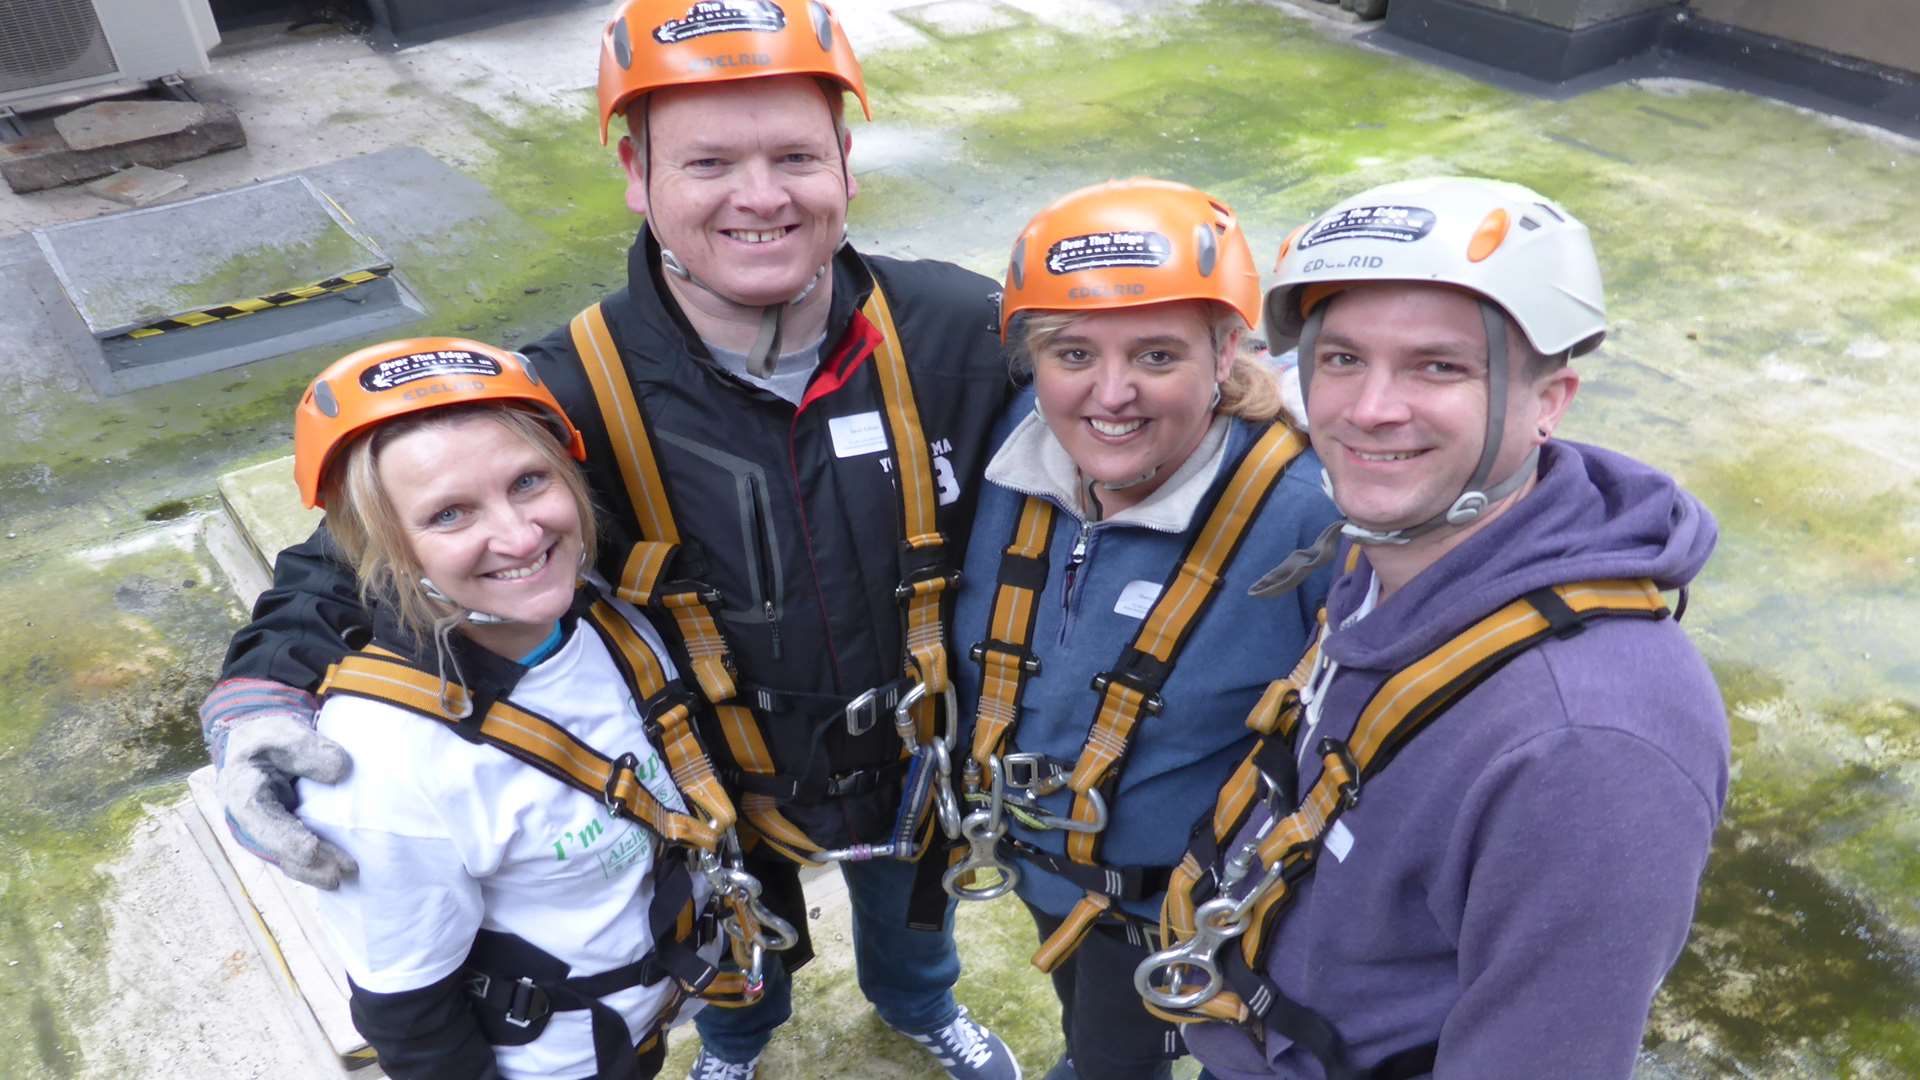 Booking remains open for the KM Maidstone Abseil Challenge, staged at Midhurst Court on Sunday, June 5.